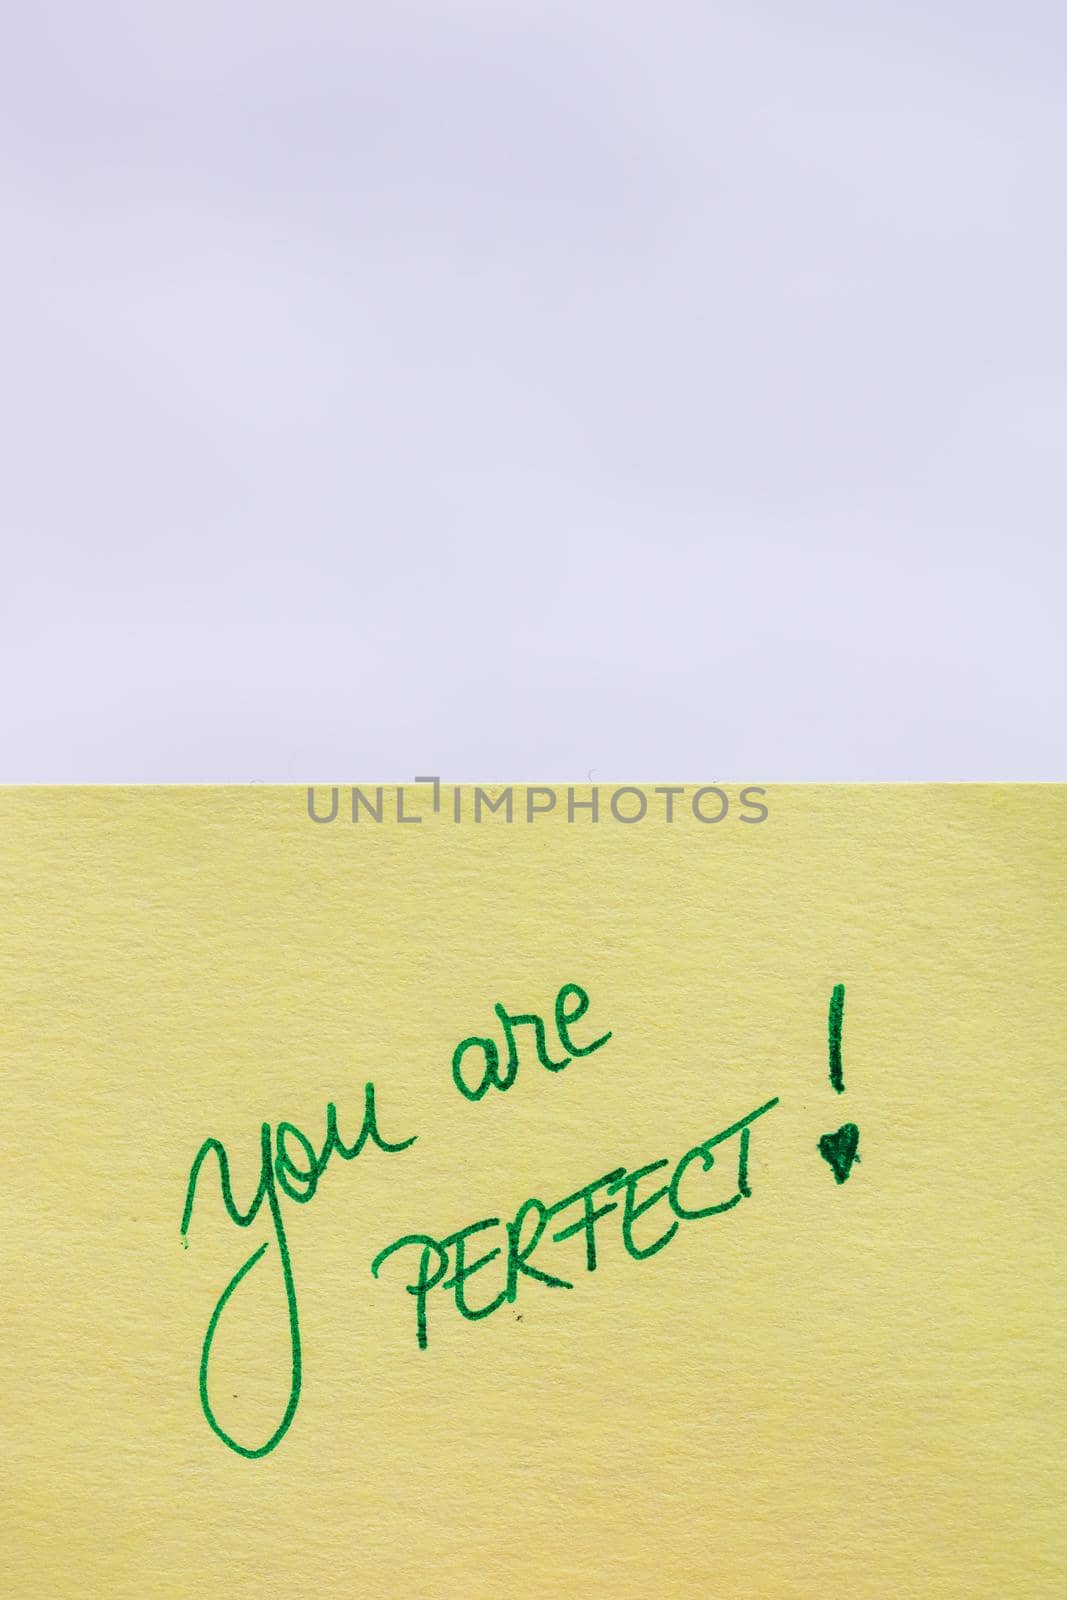 You are perfect handwriting text close up isolated on yellow paper with copy space. by vladispas